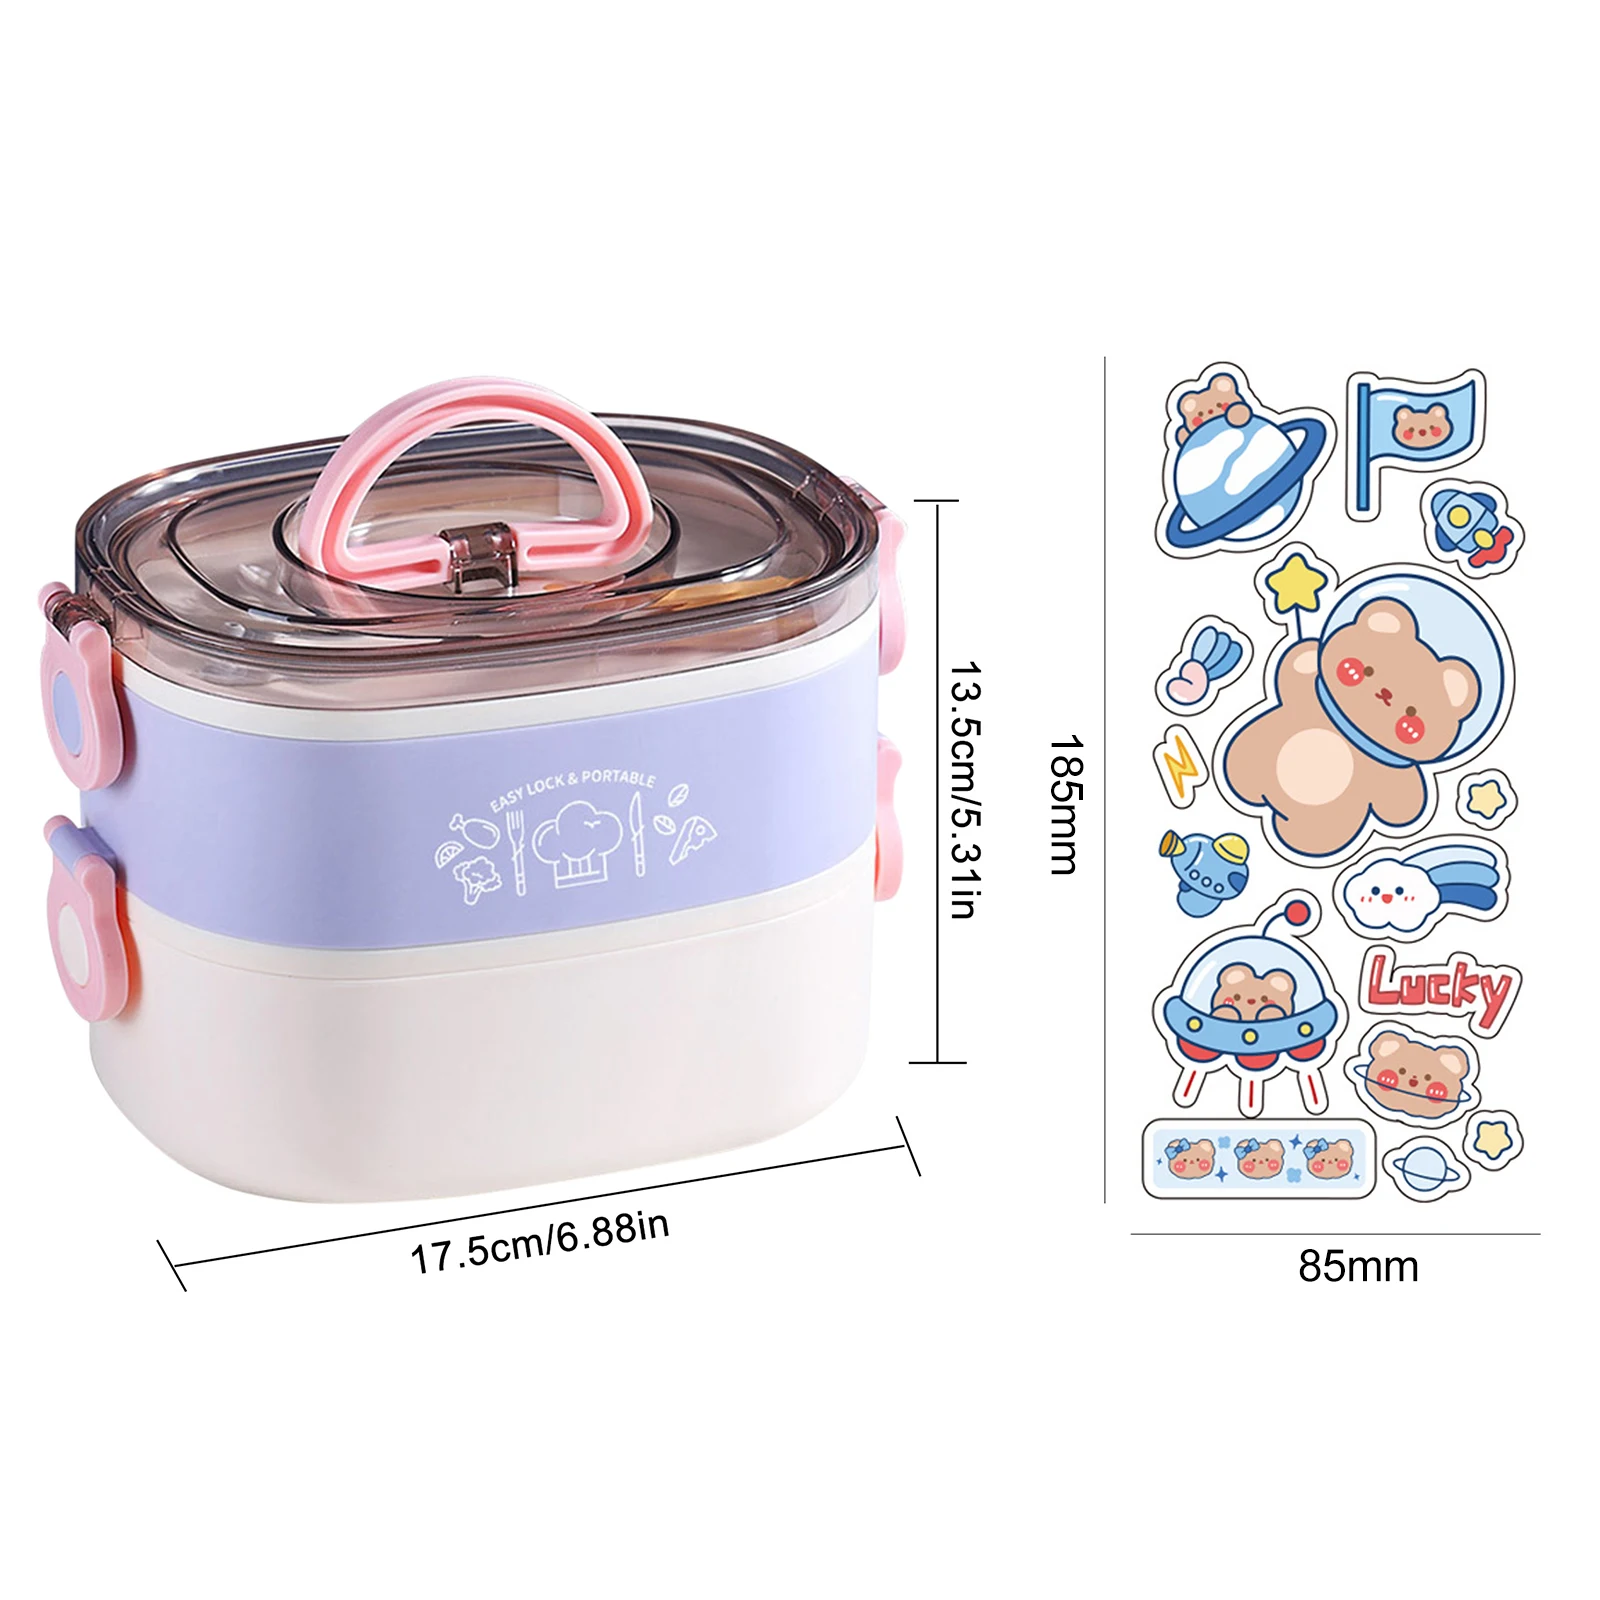 https://ae01.alicdn.com/kf/S6918ea0d3fad42e384421aaaa1241945J/Kawaii-Bento-Box-Cute-Leakproof-Stackable-Lunch-Box-with-Cartoon-3D-Stickers-Lunch-Container-with-Divided.jpg